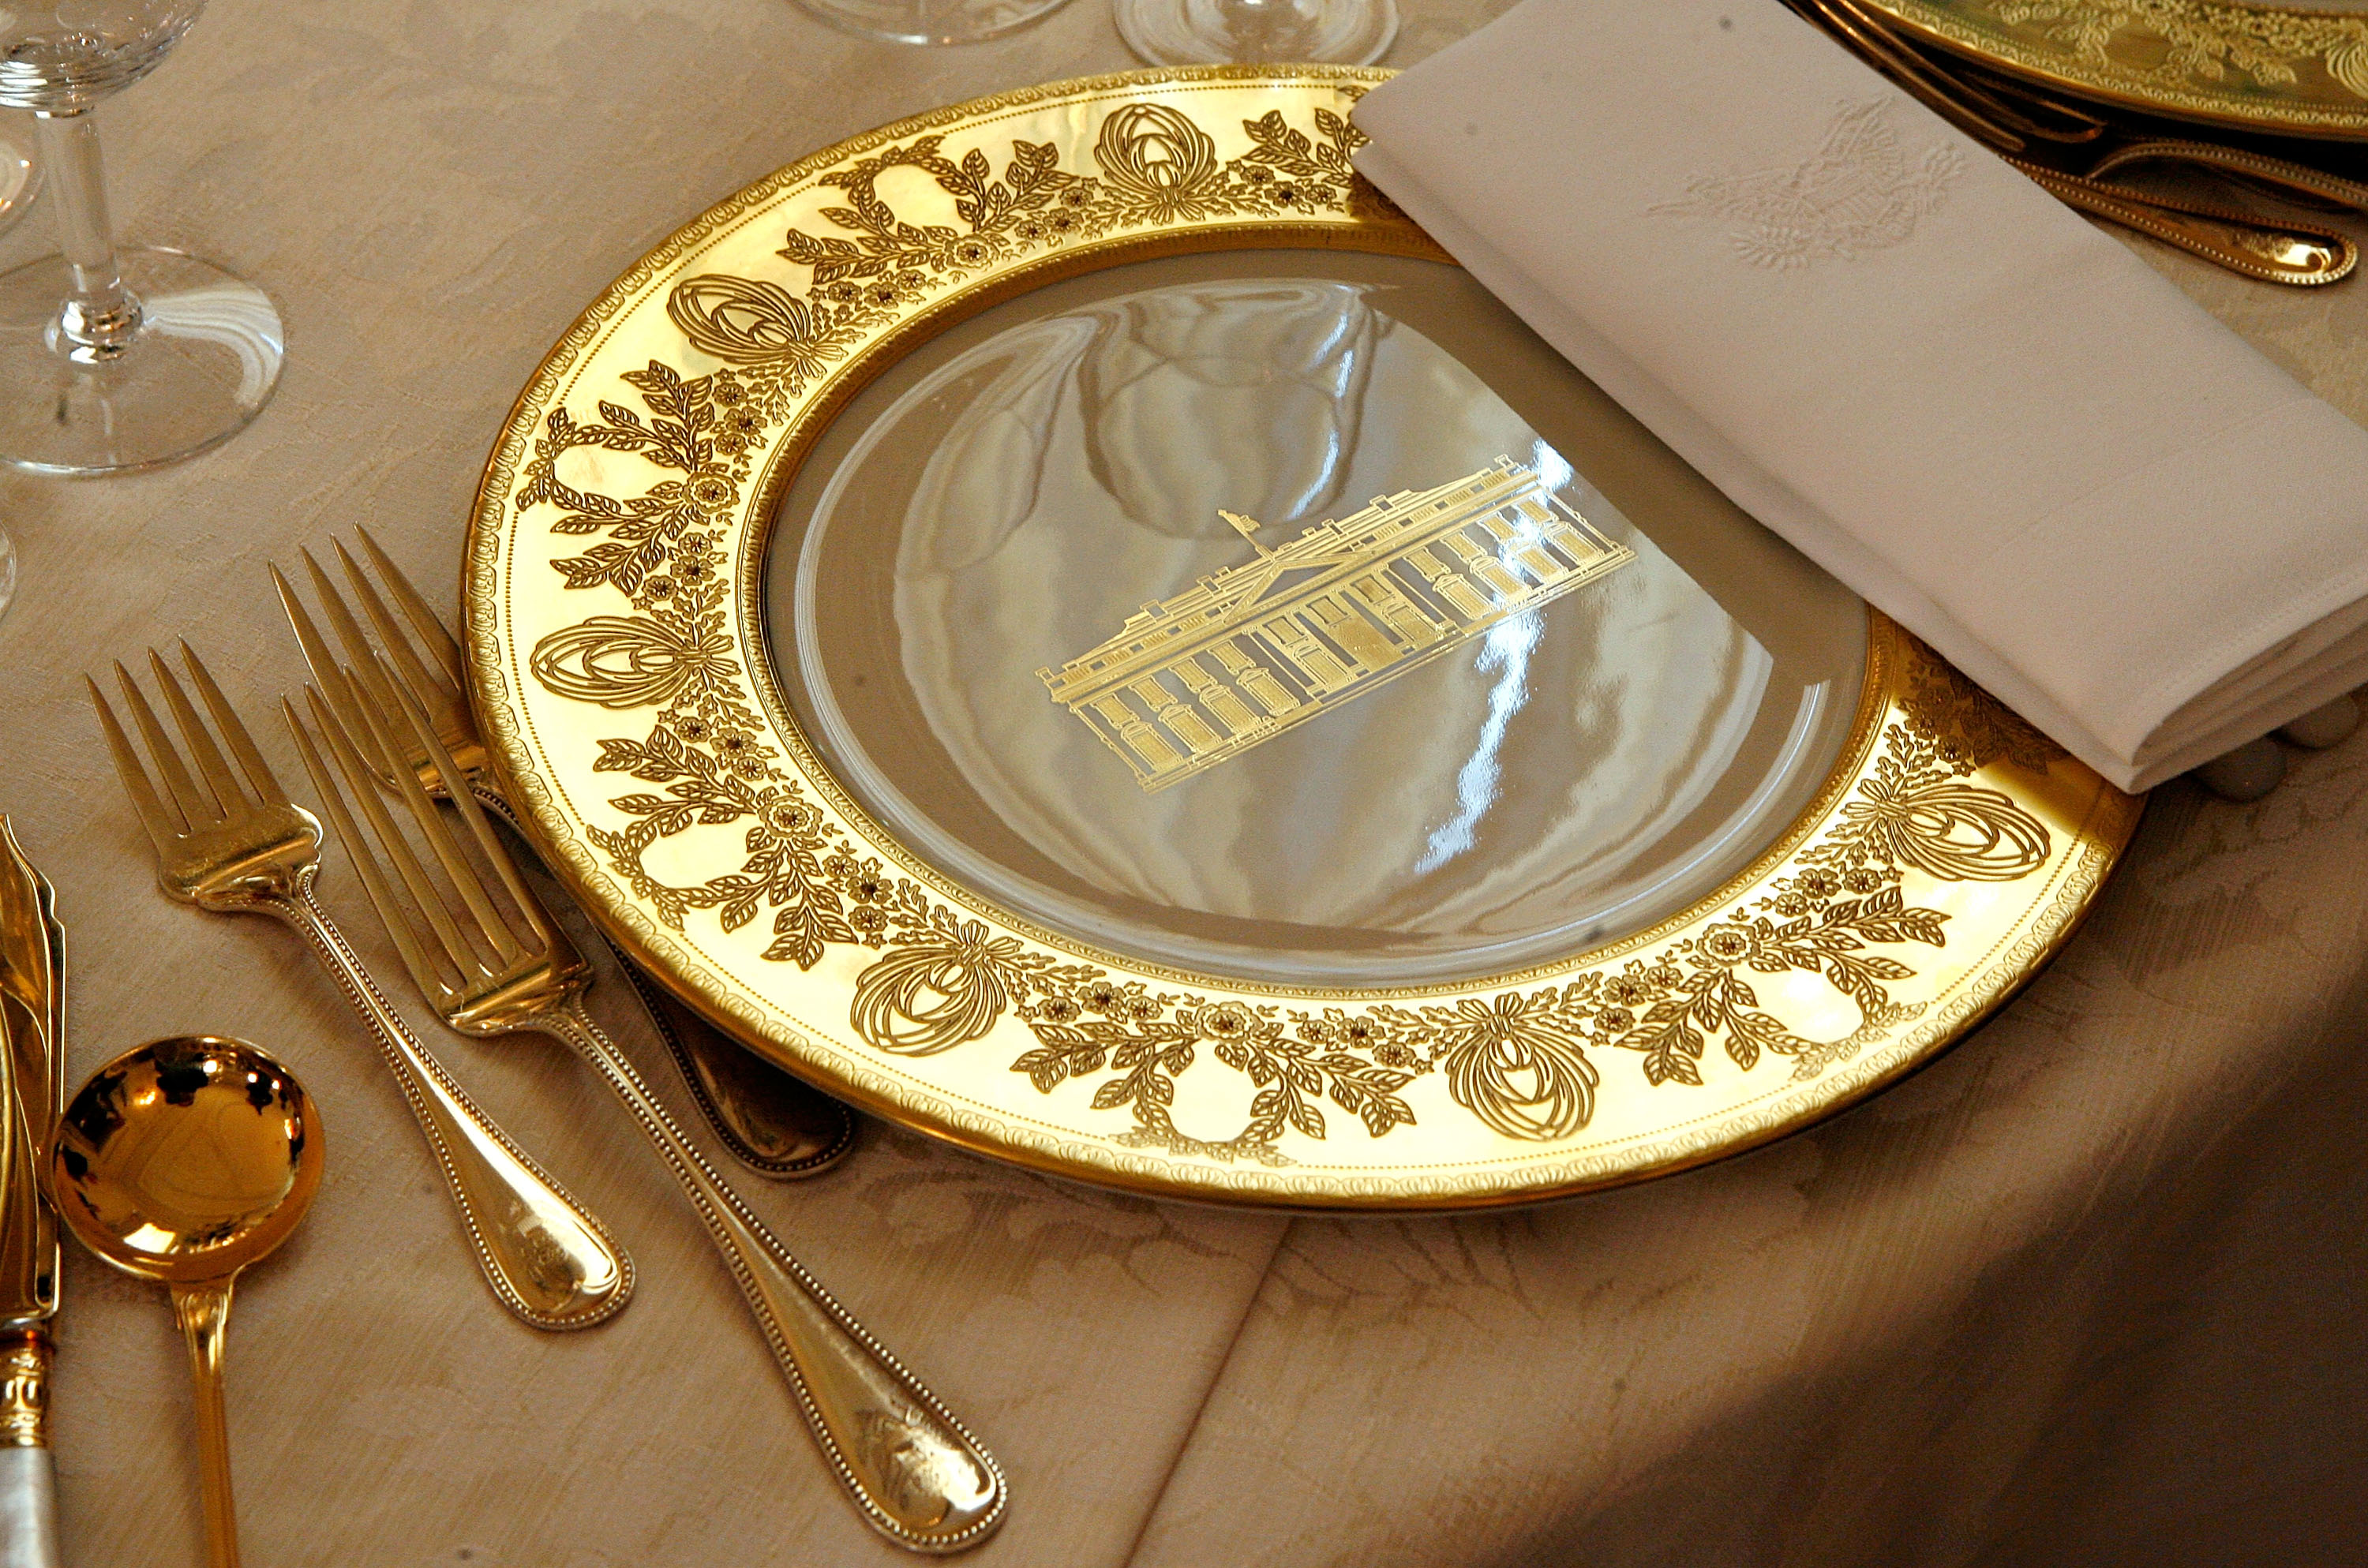 The Clinton china will be used for the state dinner in honor of French President Emmanuel Macron (Chip Somodevilla—Getty Images)